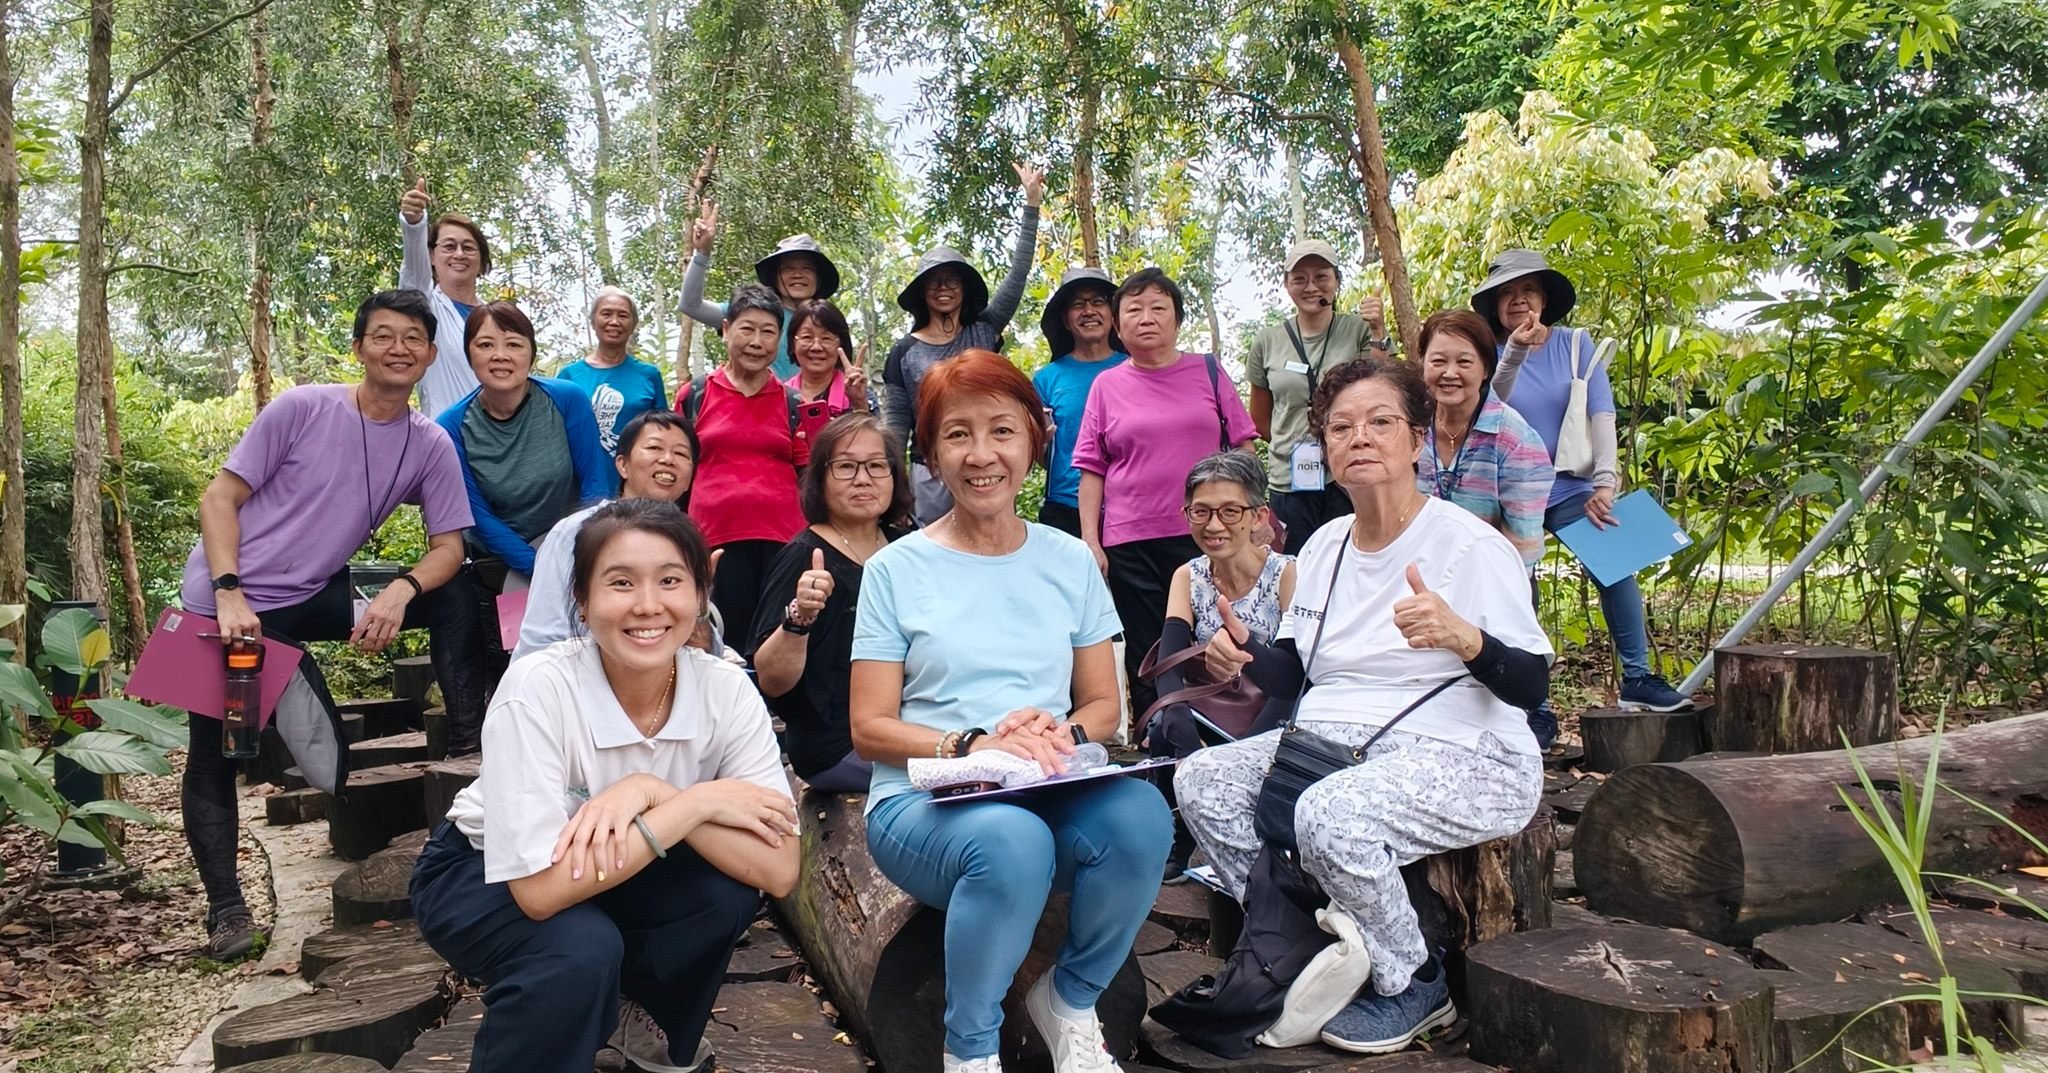 NUS Research Intervention Program Week 3: We focused on the importance of proper watering techniques and included a therapeutic garden tour. We delved deeper into the impact of overwatering and underwatering on plant survival, discussed the factors i